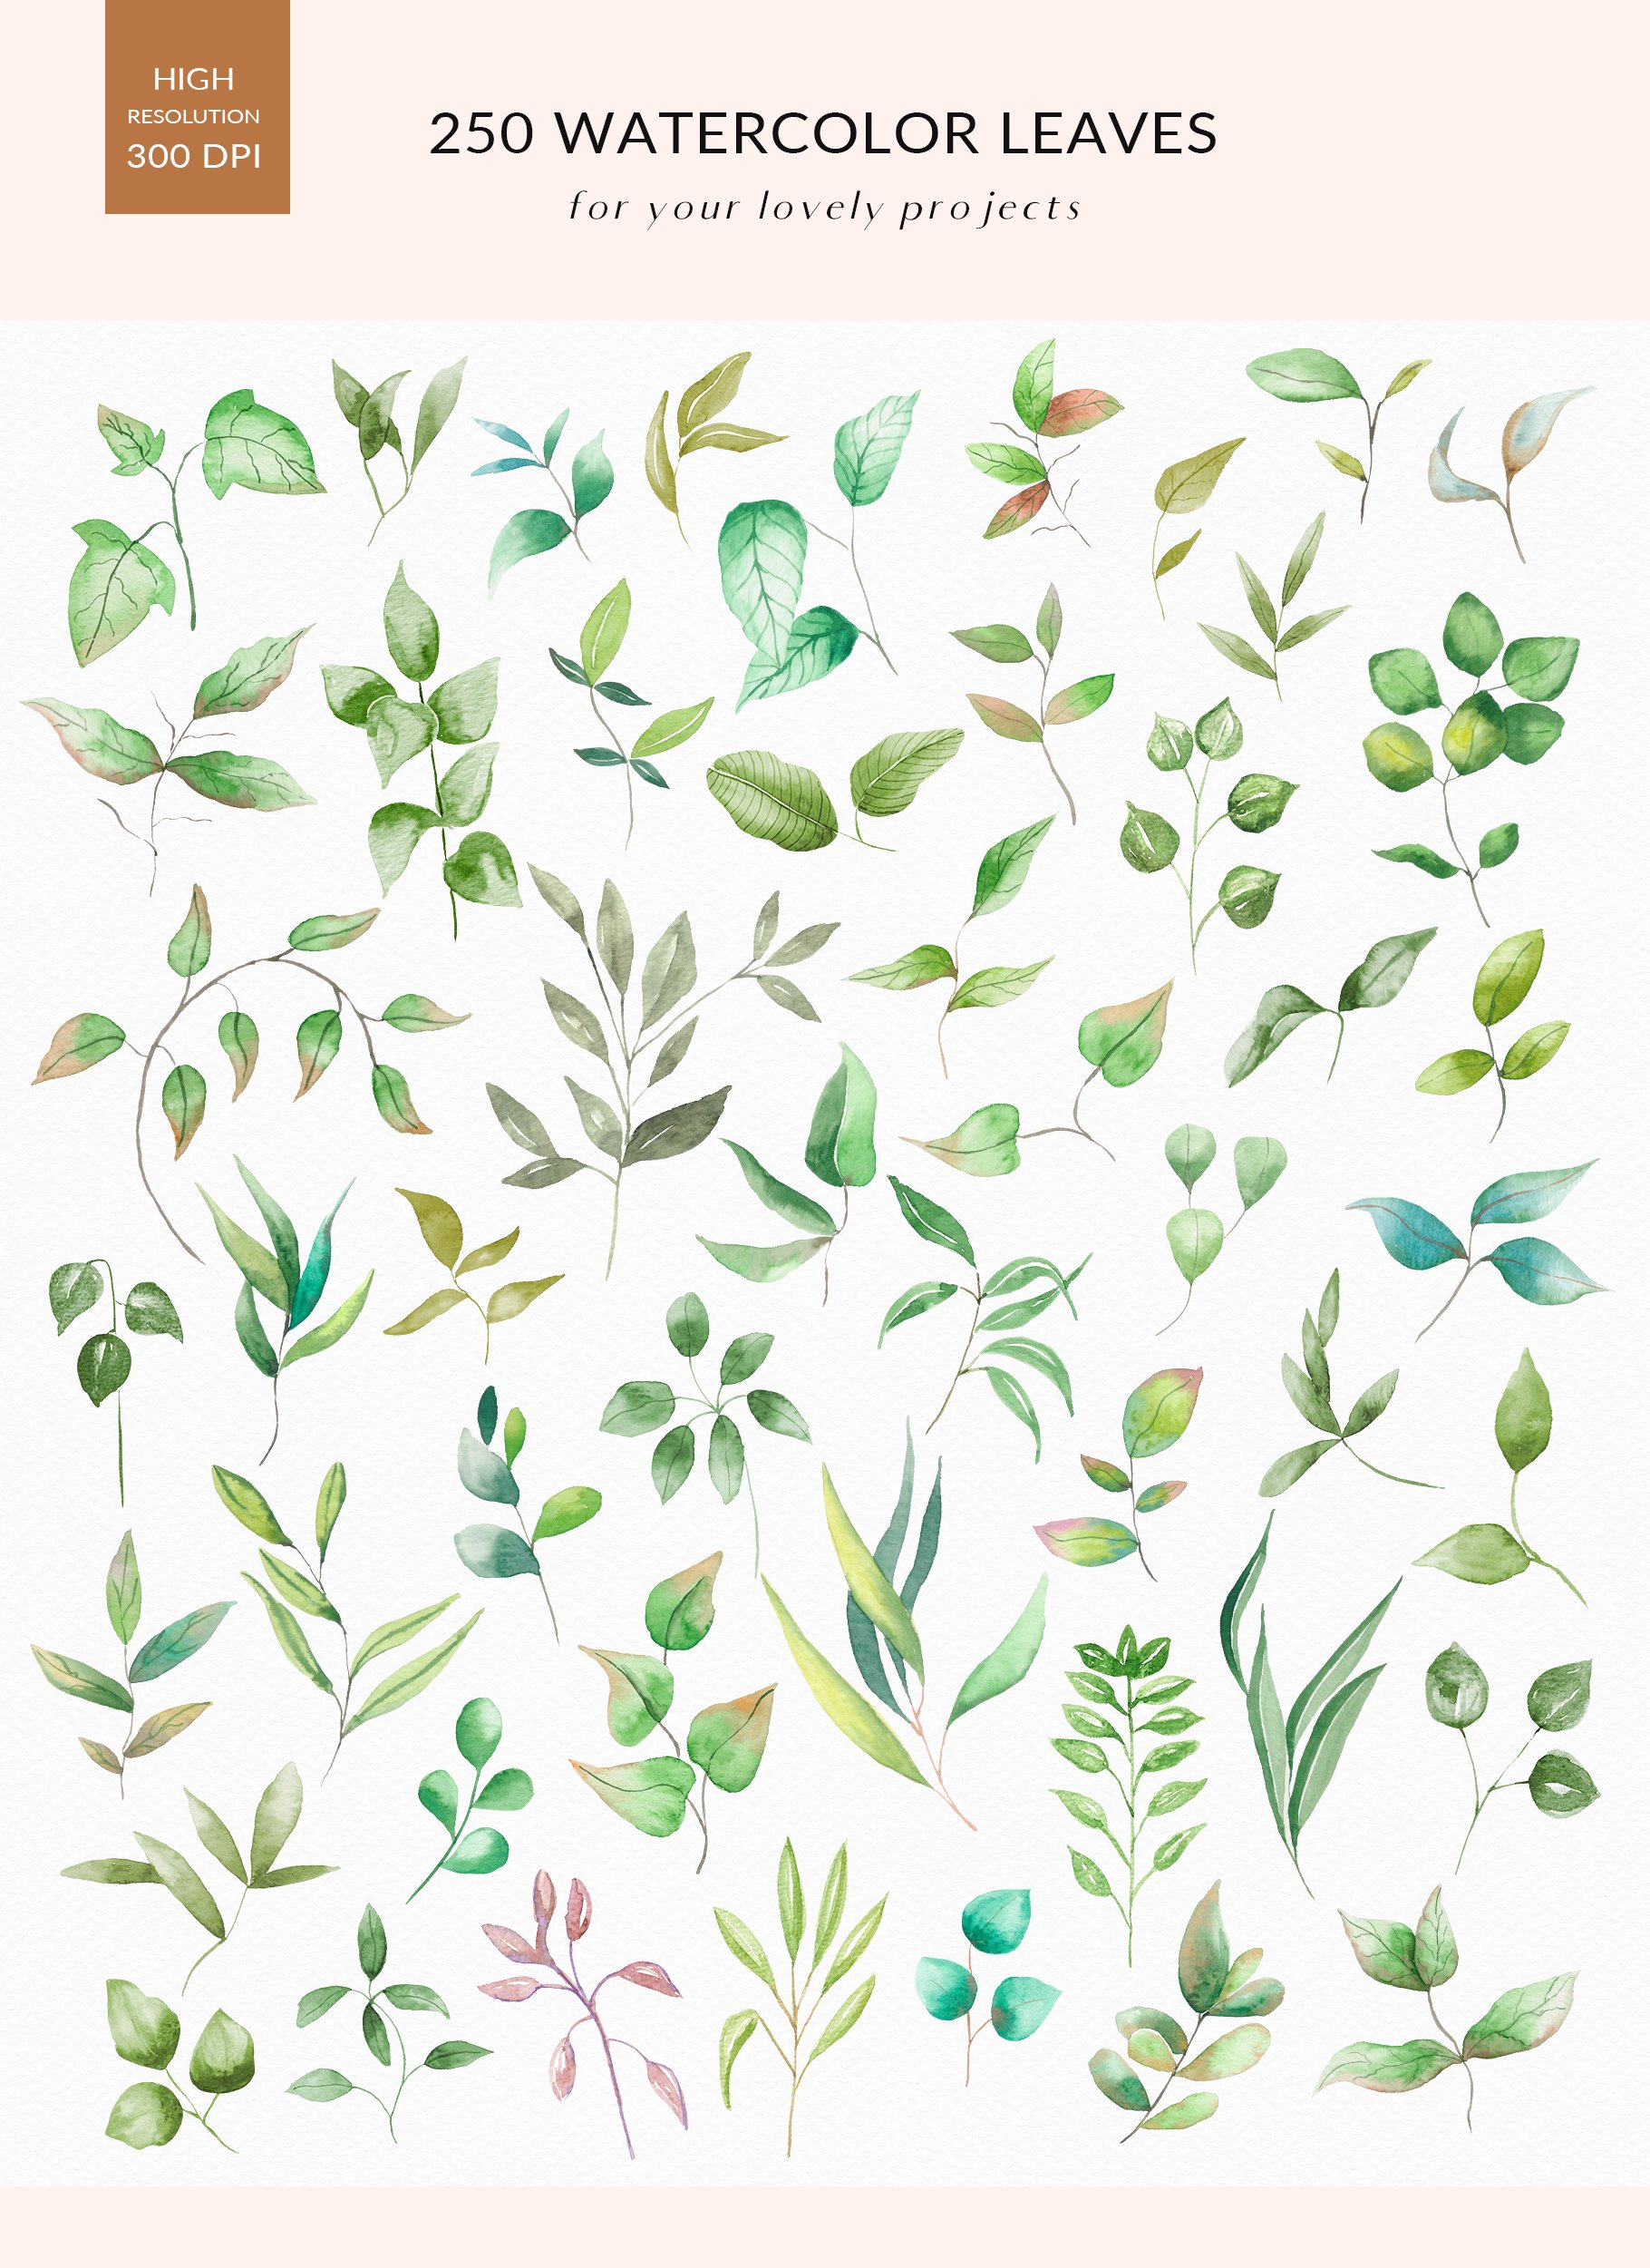 Watercolor Leaves Greenery 250 PNGs preview image.